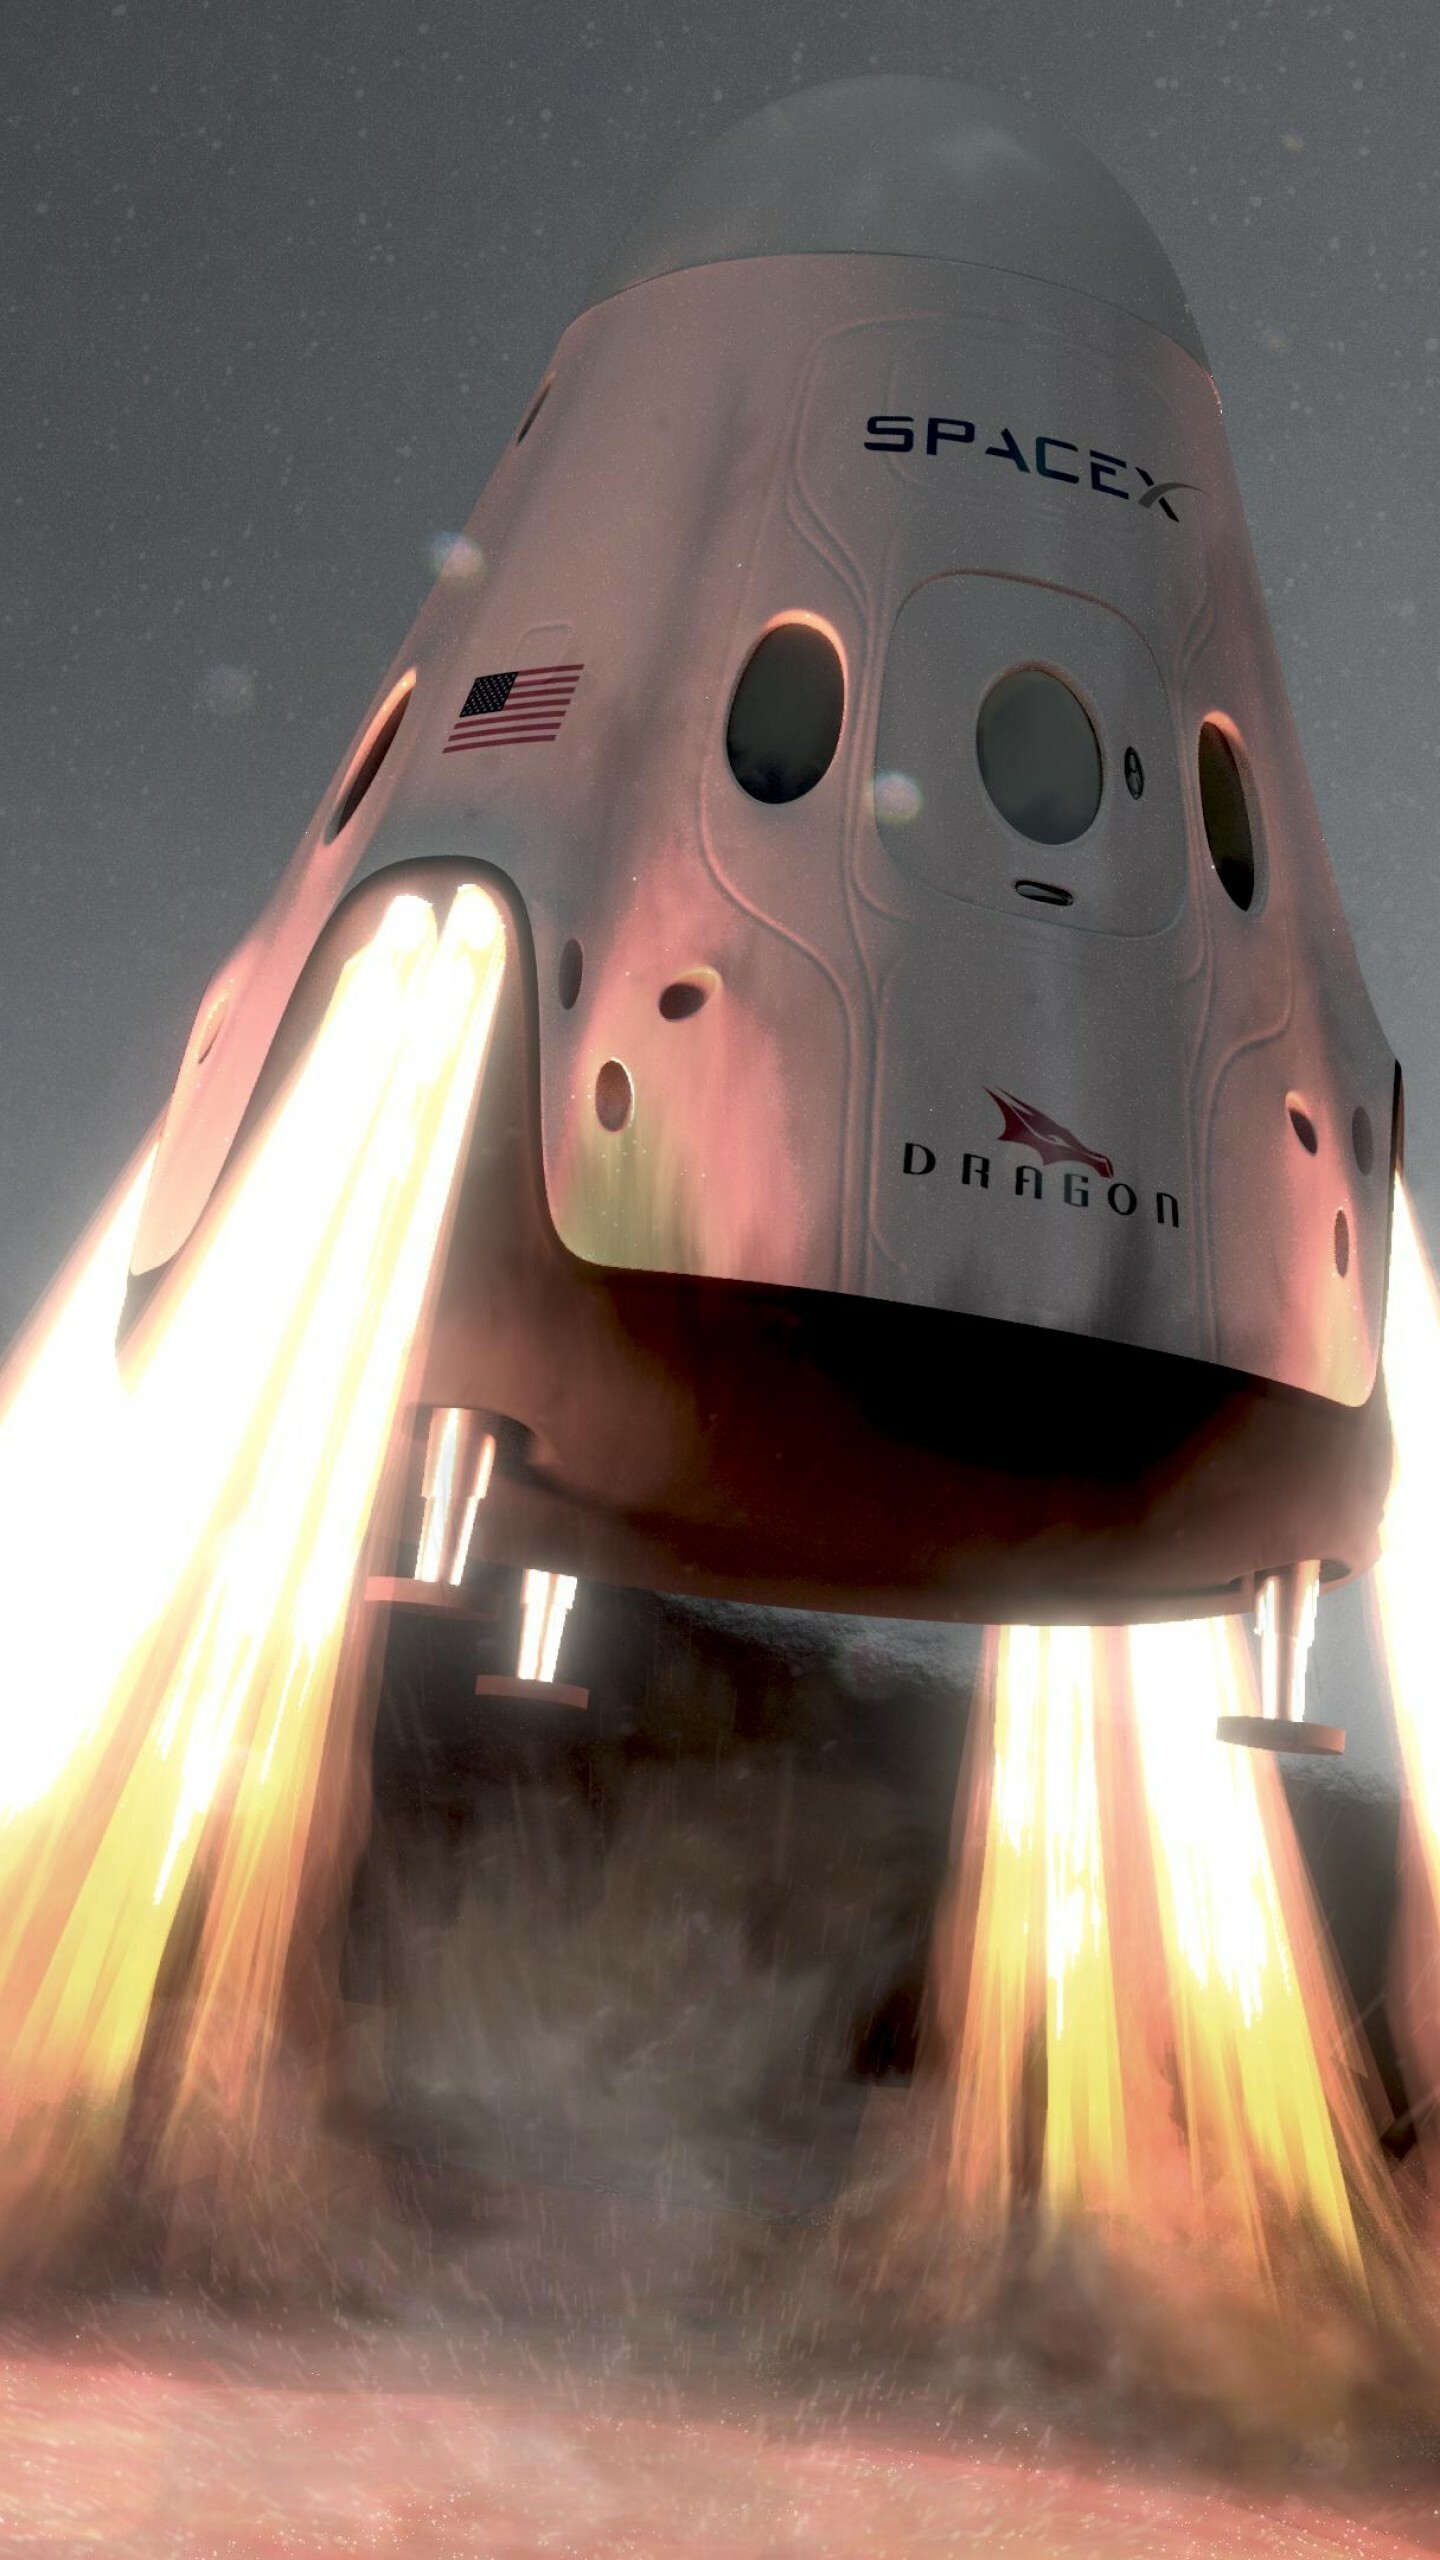 SpaceX: Red Dragon's mission – to test techniques and technology to enter the Martian atmosphere. 1440x2560 HD Wallpaper.